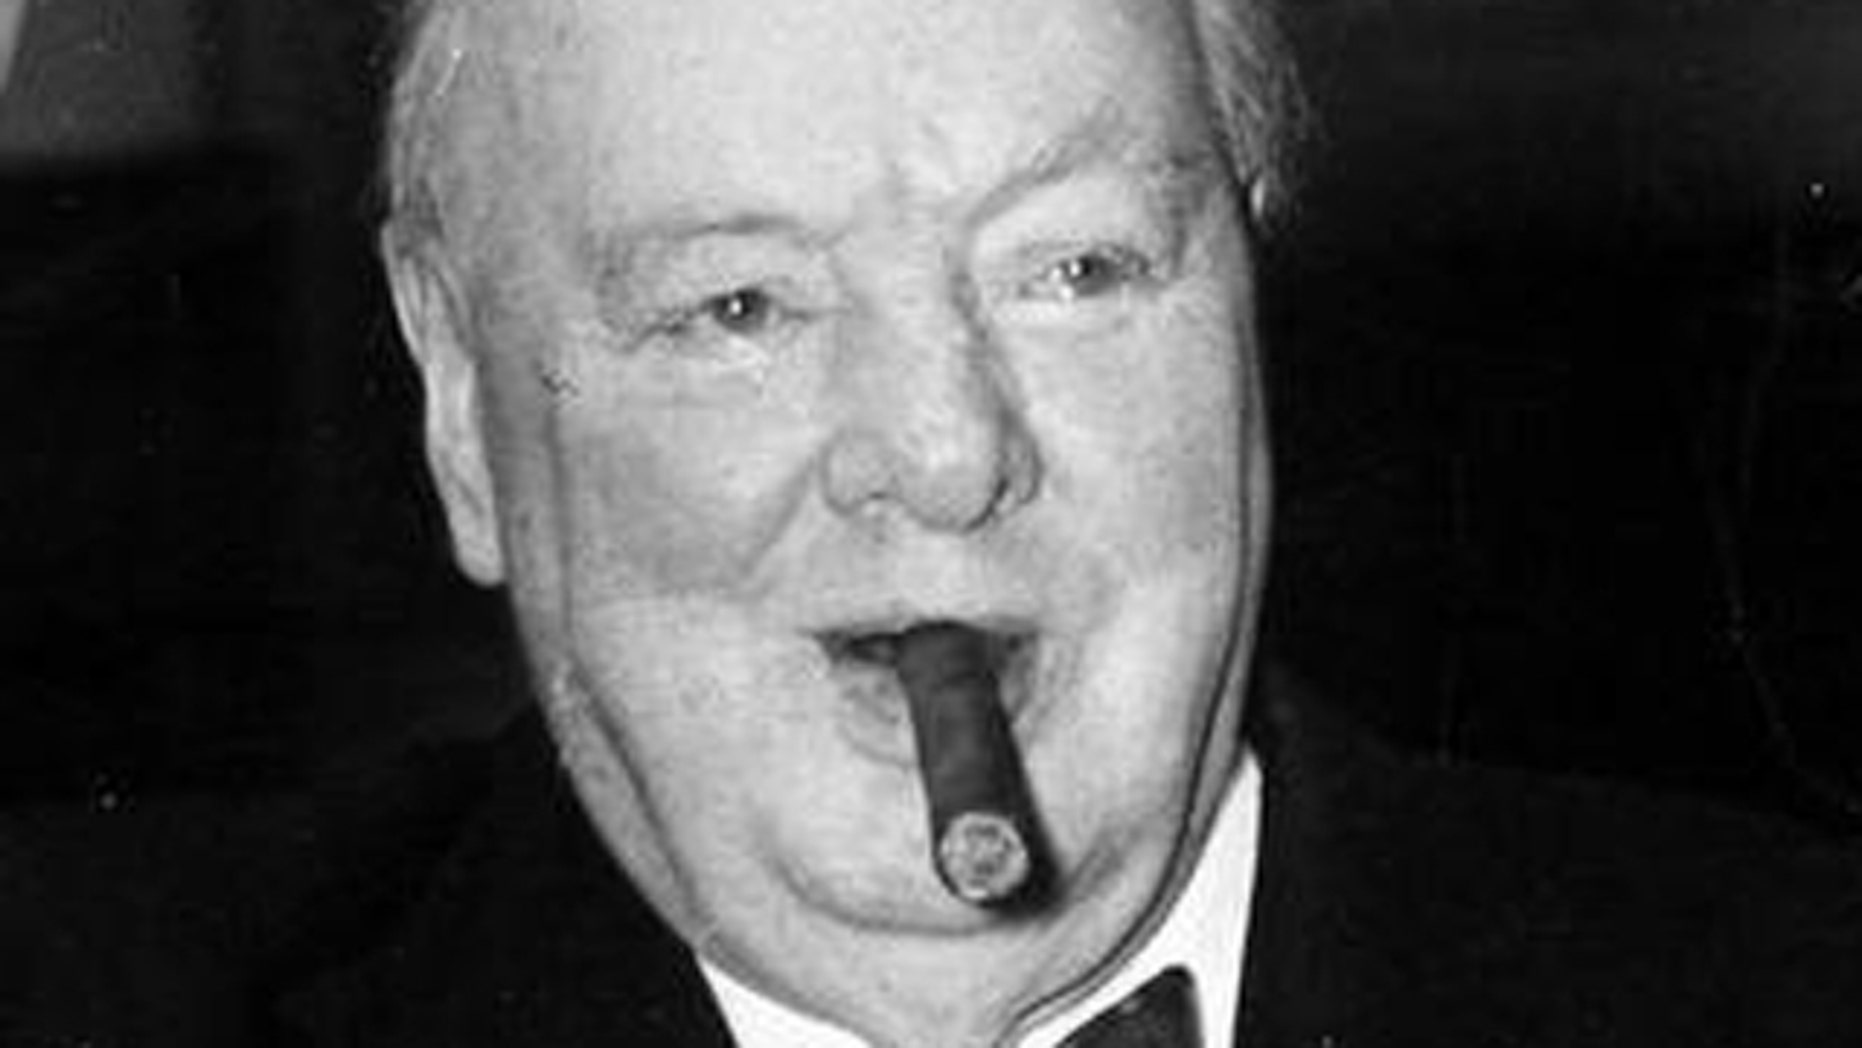 Winston Churchill's Cigar Airbrushed From Iconic Photo at British WWII ...